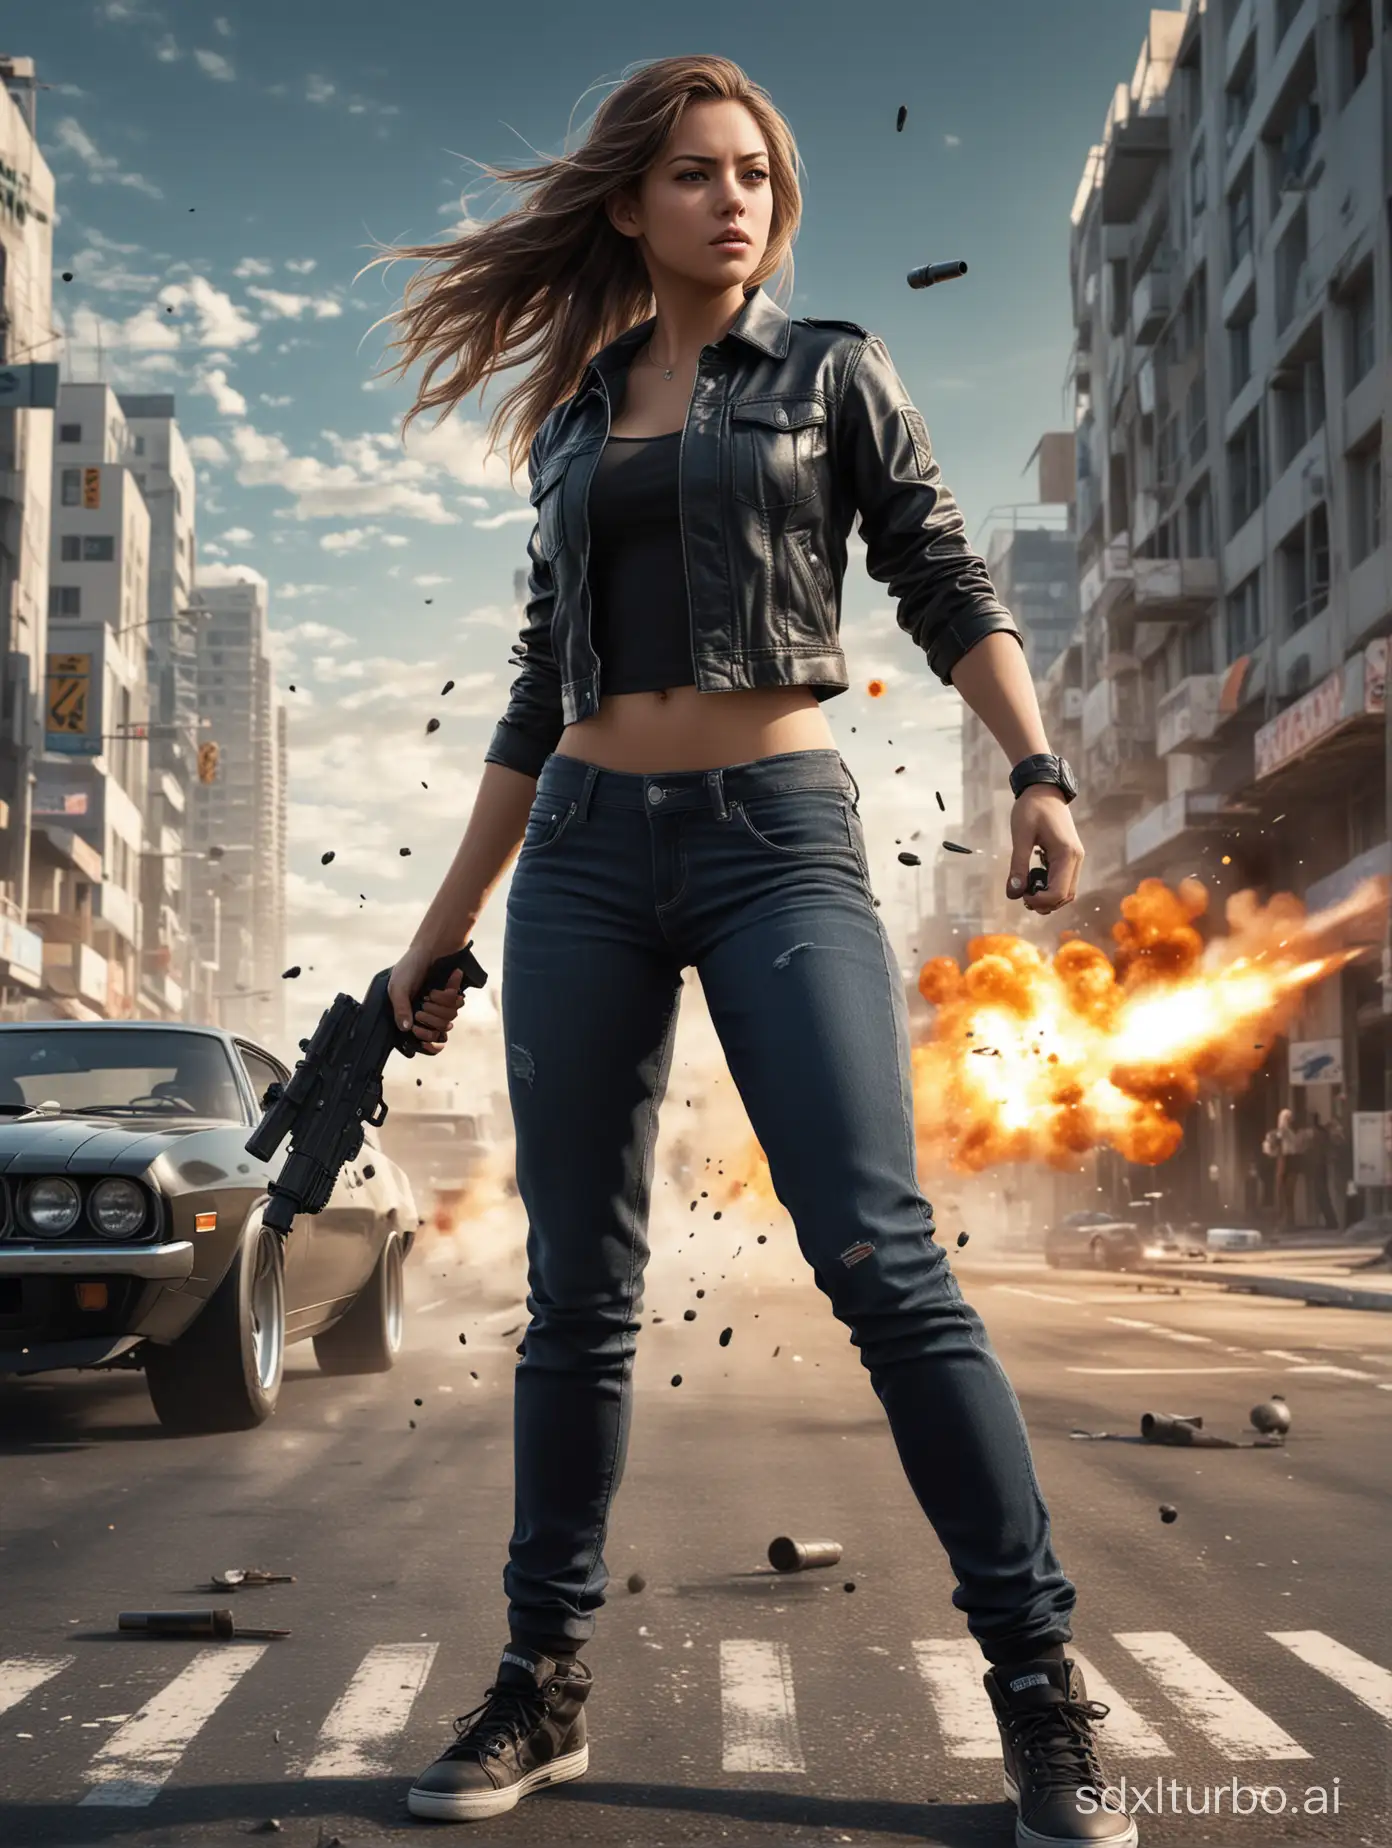 Anime-Girl-Firing-Bullet-Dynamic-Action-Poster-Inspired-by-The-Fast-and-the-Furious